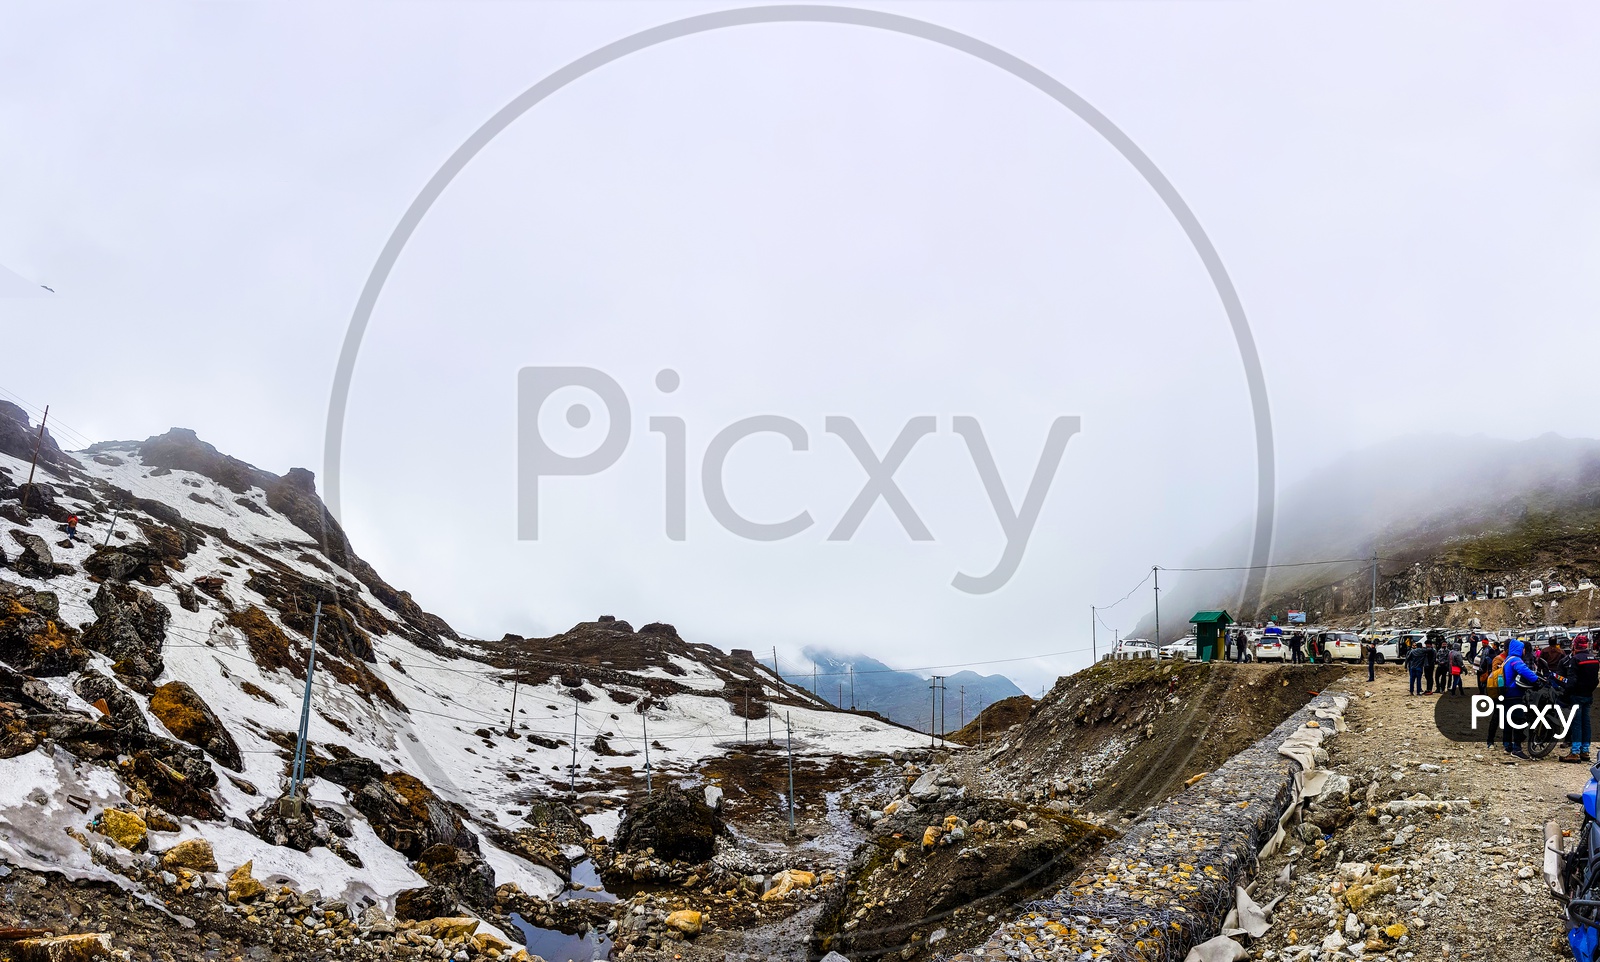 July,2018,Nathu-La, Sikkim, India. A Panoramic View Of Nathu-La Pass With Tourists And Parked Cars.At Sikkiim, India. Nathu-La Marks The Indo Chinese Border And Is A Very Popular Tourist Attraction